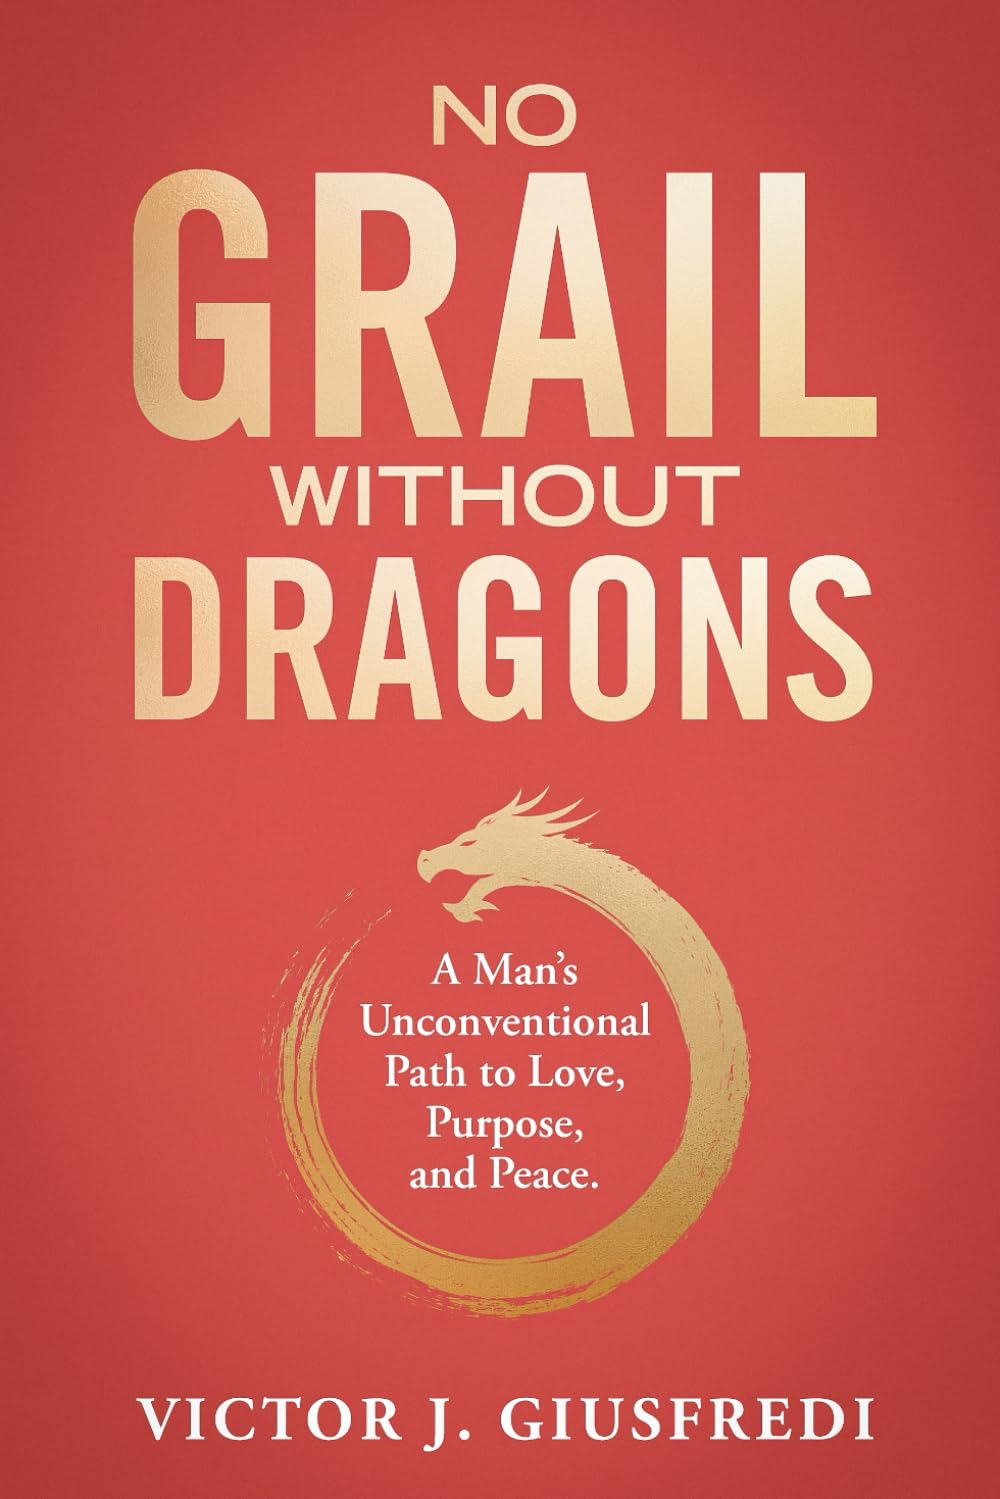 The Chris Voss Show Podcast – No Grail Without Dragons: A Man's  Unconventional Path to Love, Purpose, and Peace by Victor J. Giusfredi